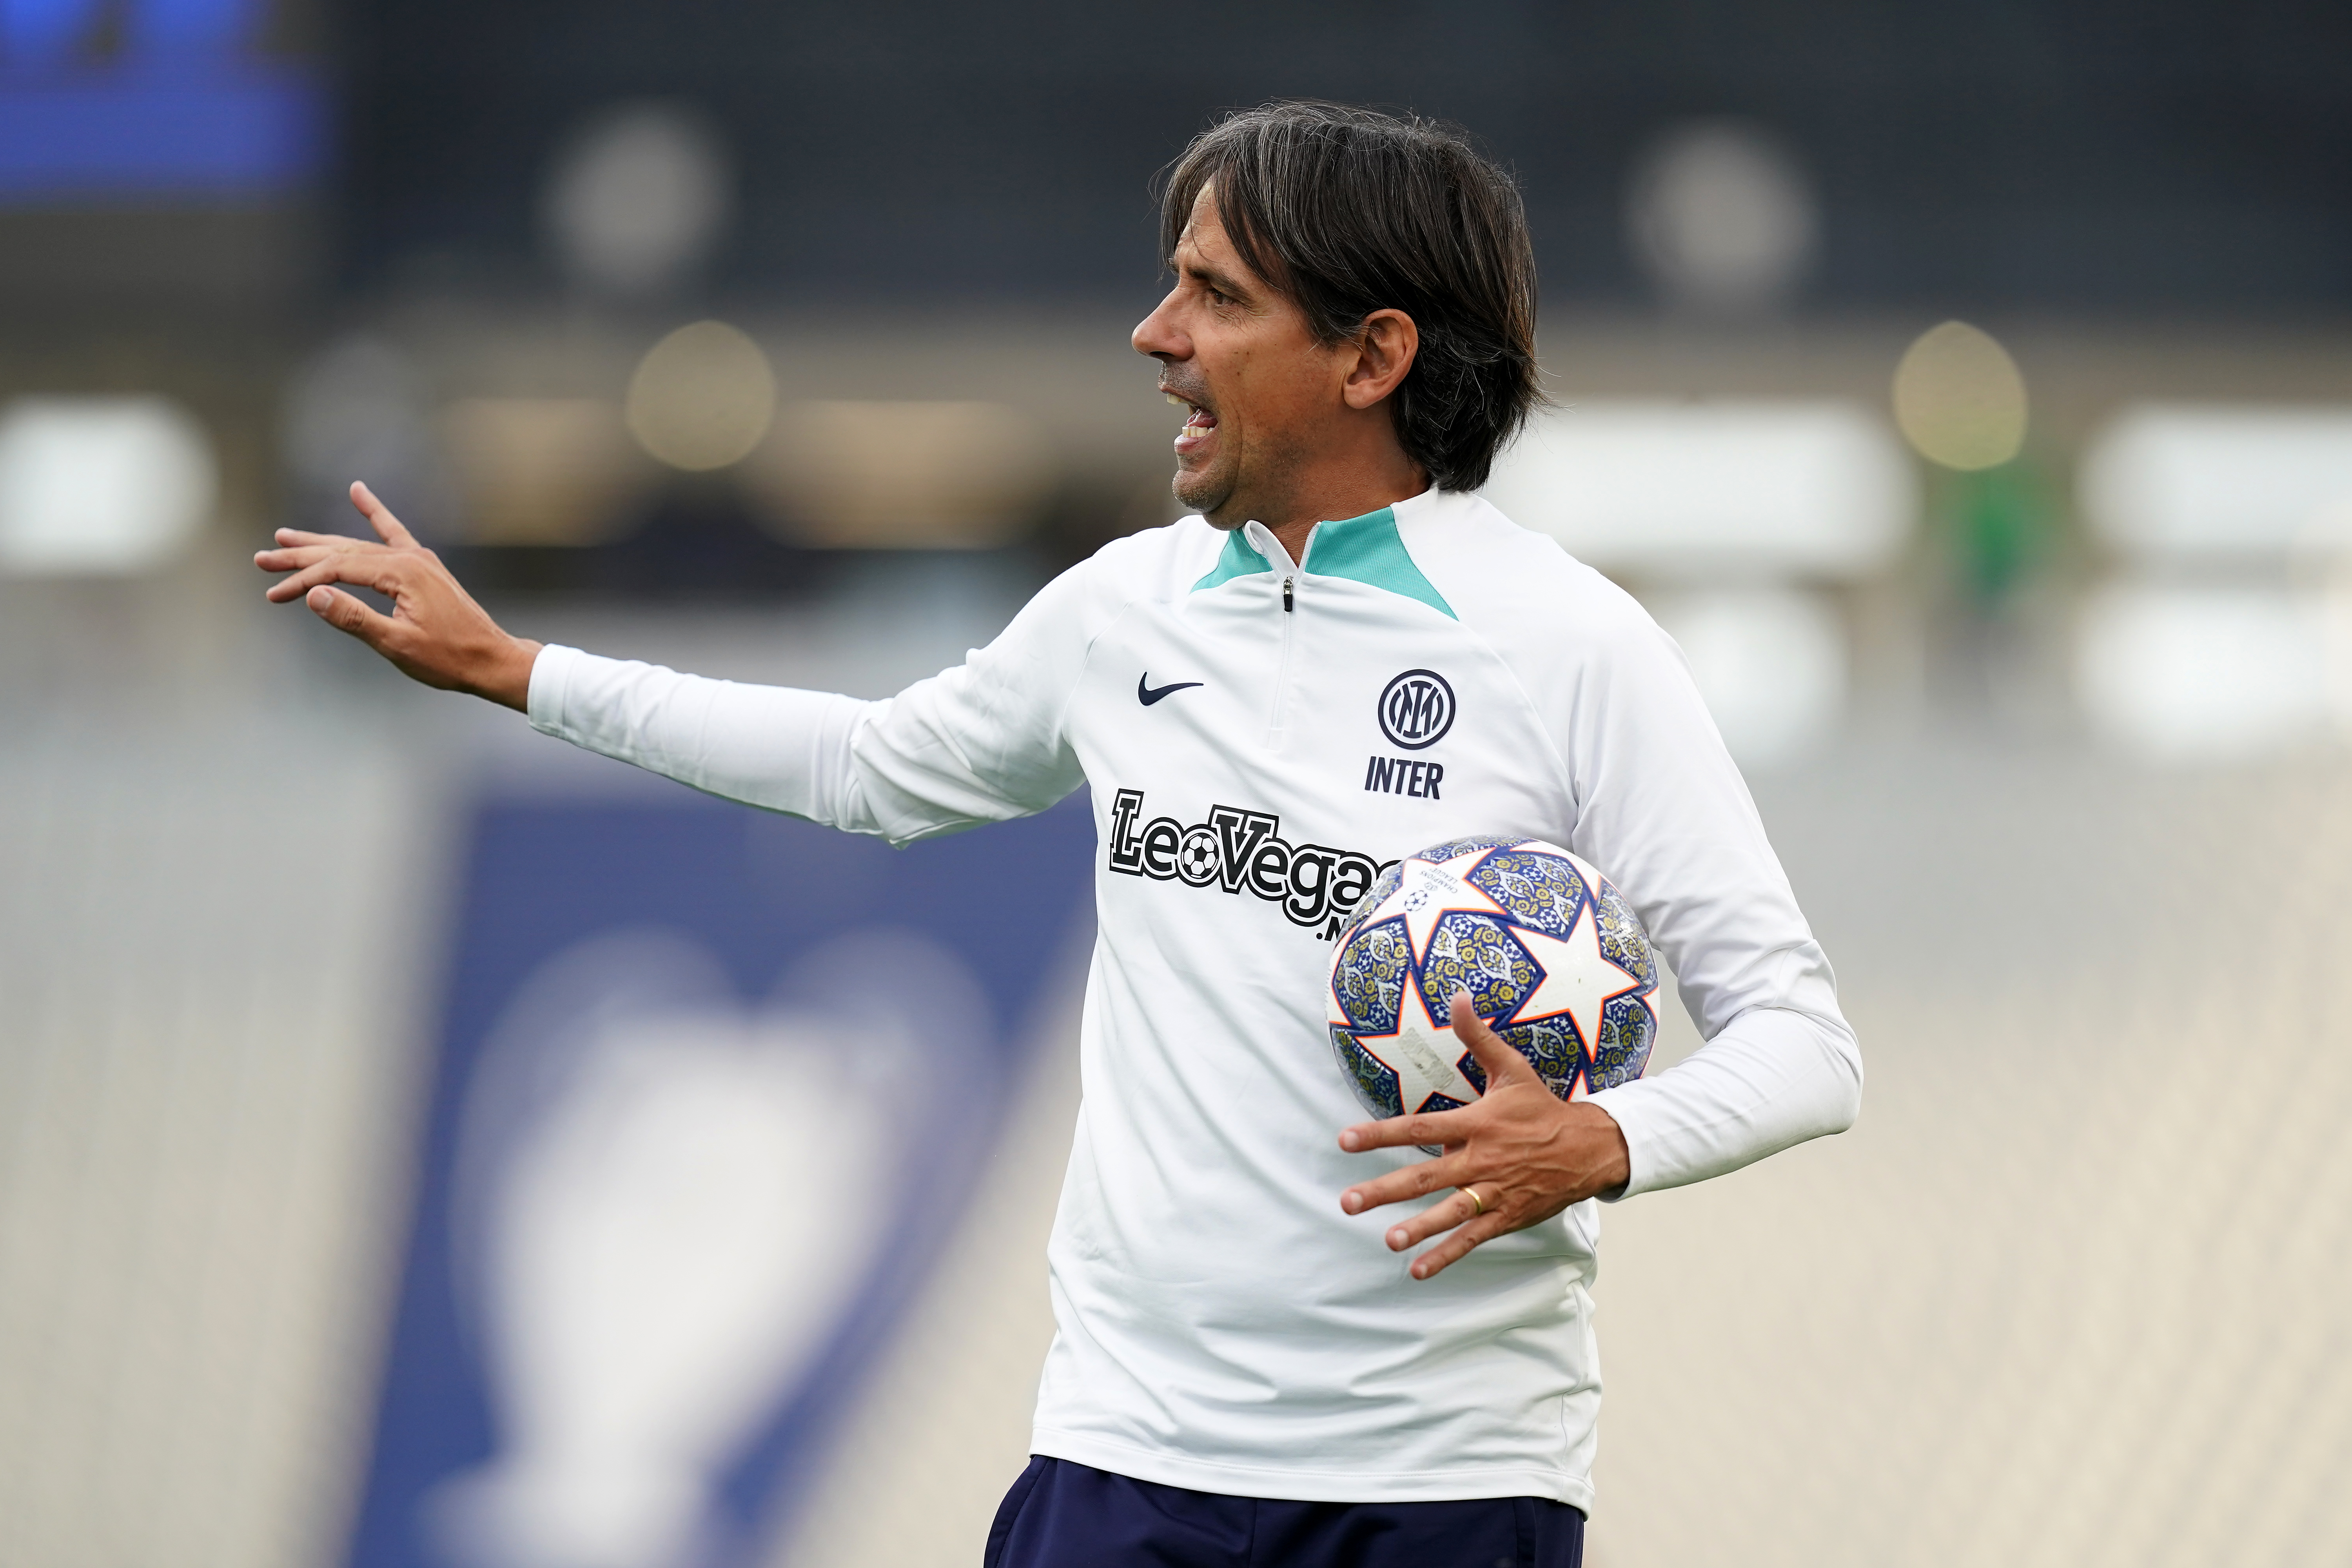 Inter Milan coach Simone Inzaghi during a training session